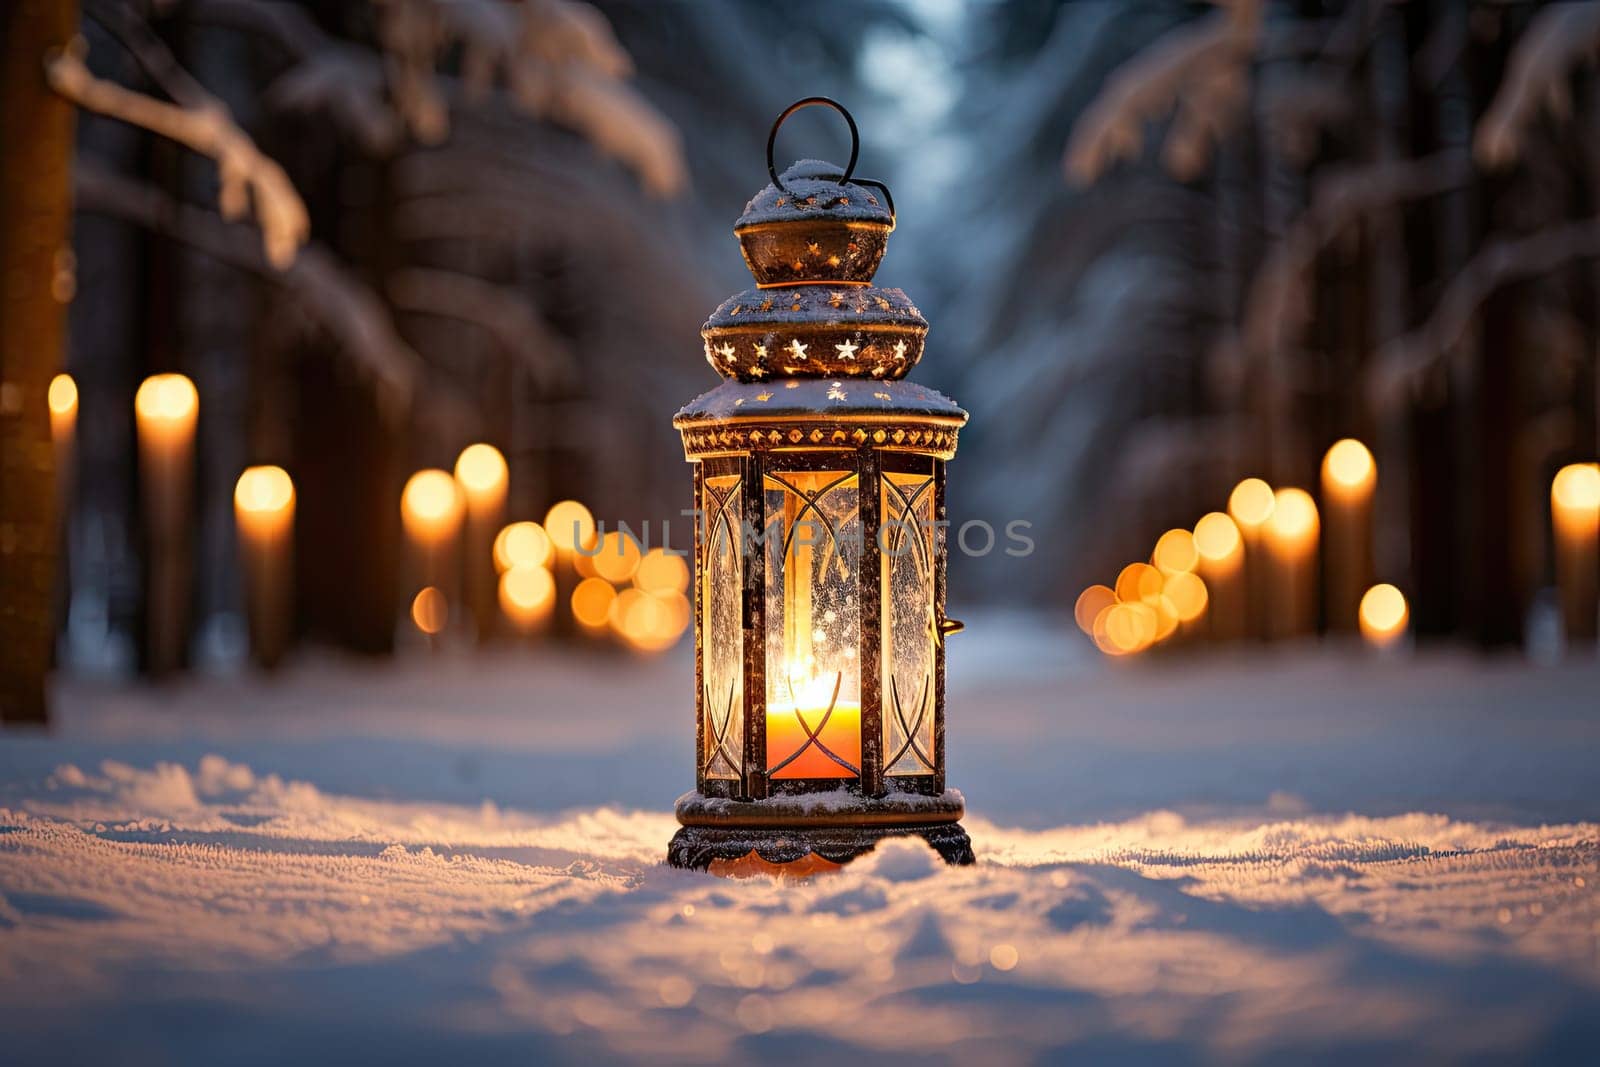 A Serene Winter Night: A Lantern Illuminating a Snowy Path in the Forest at Dusk